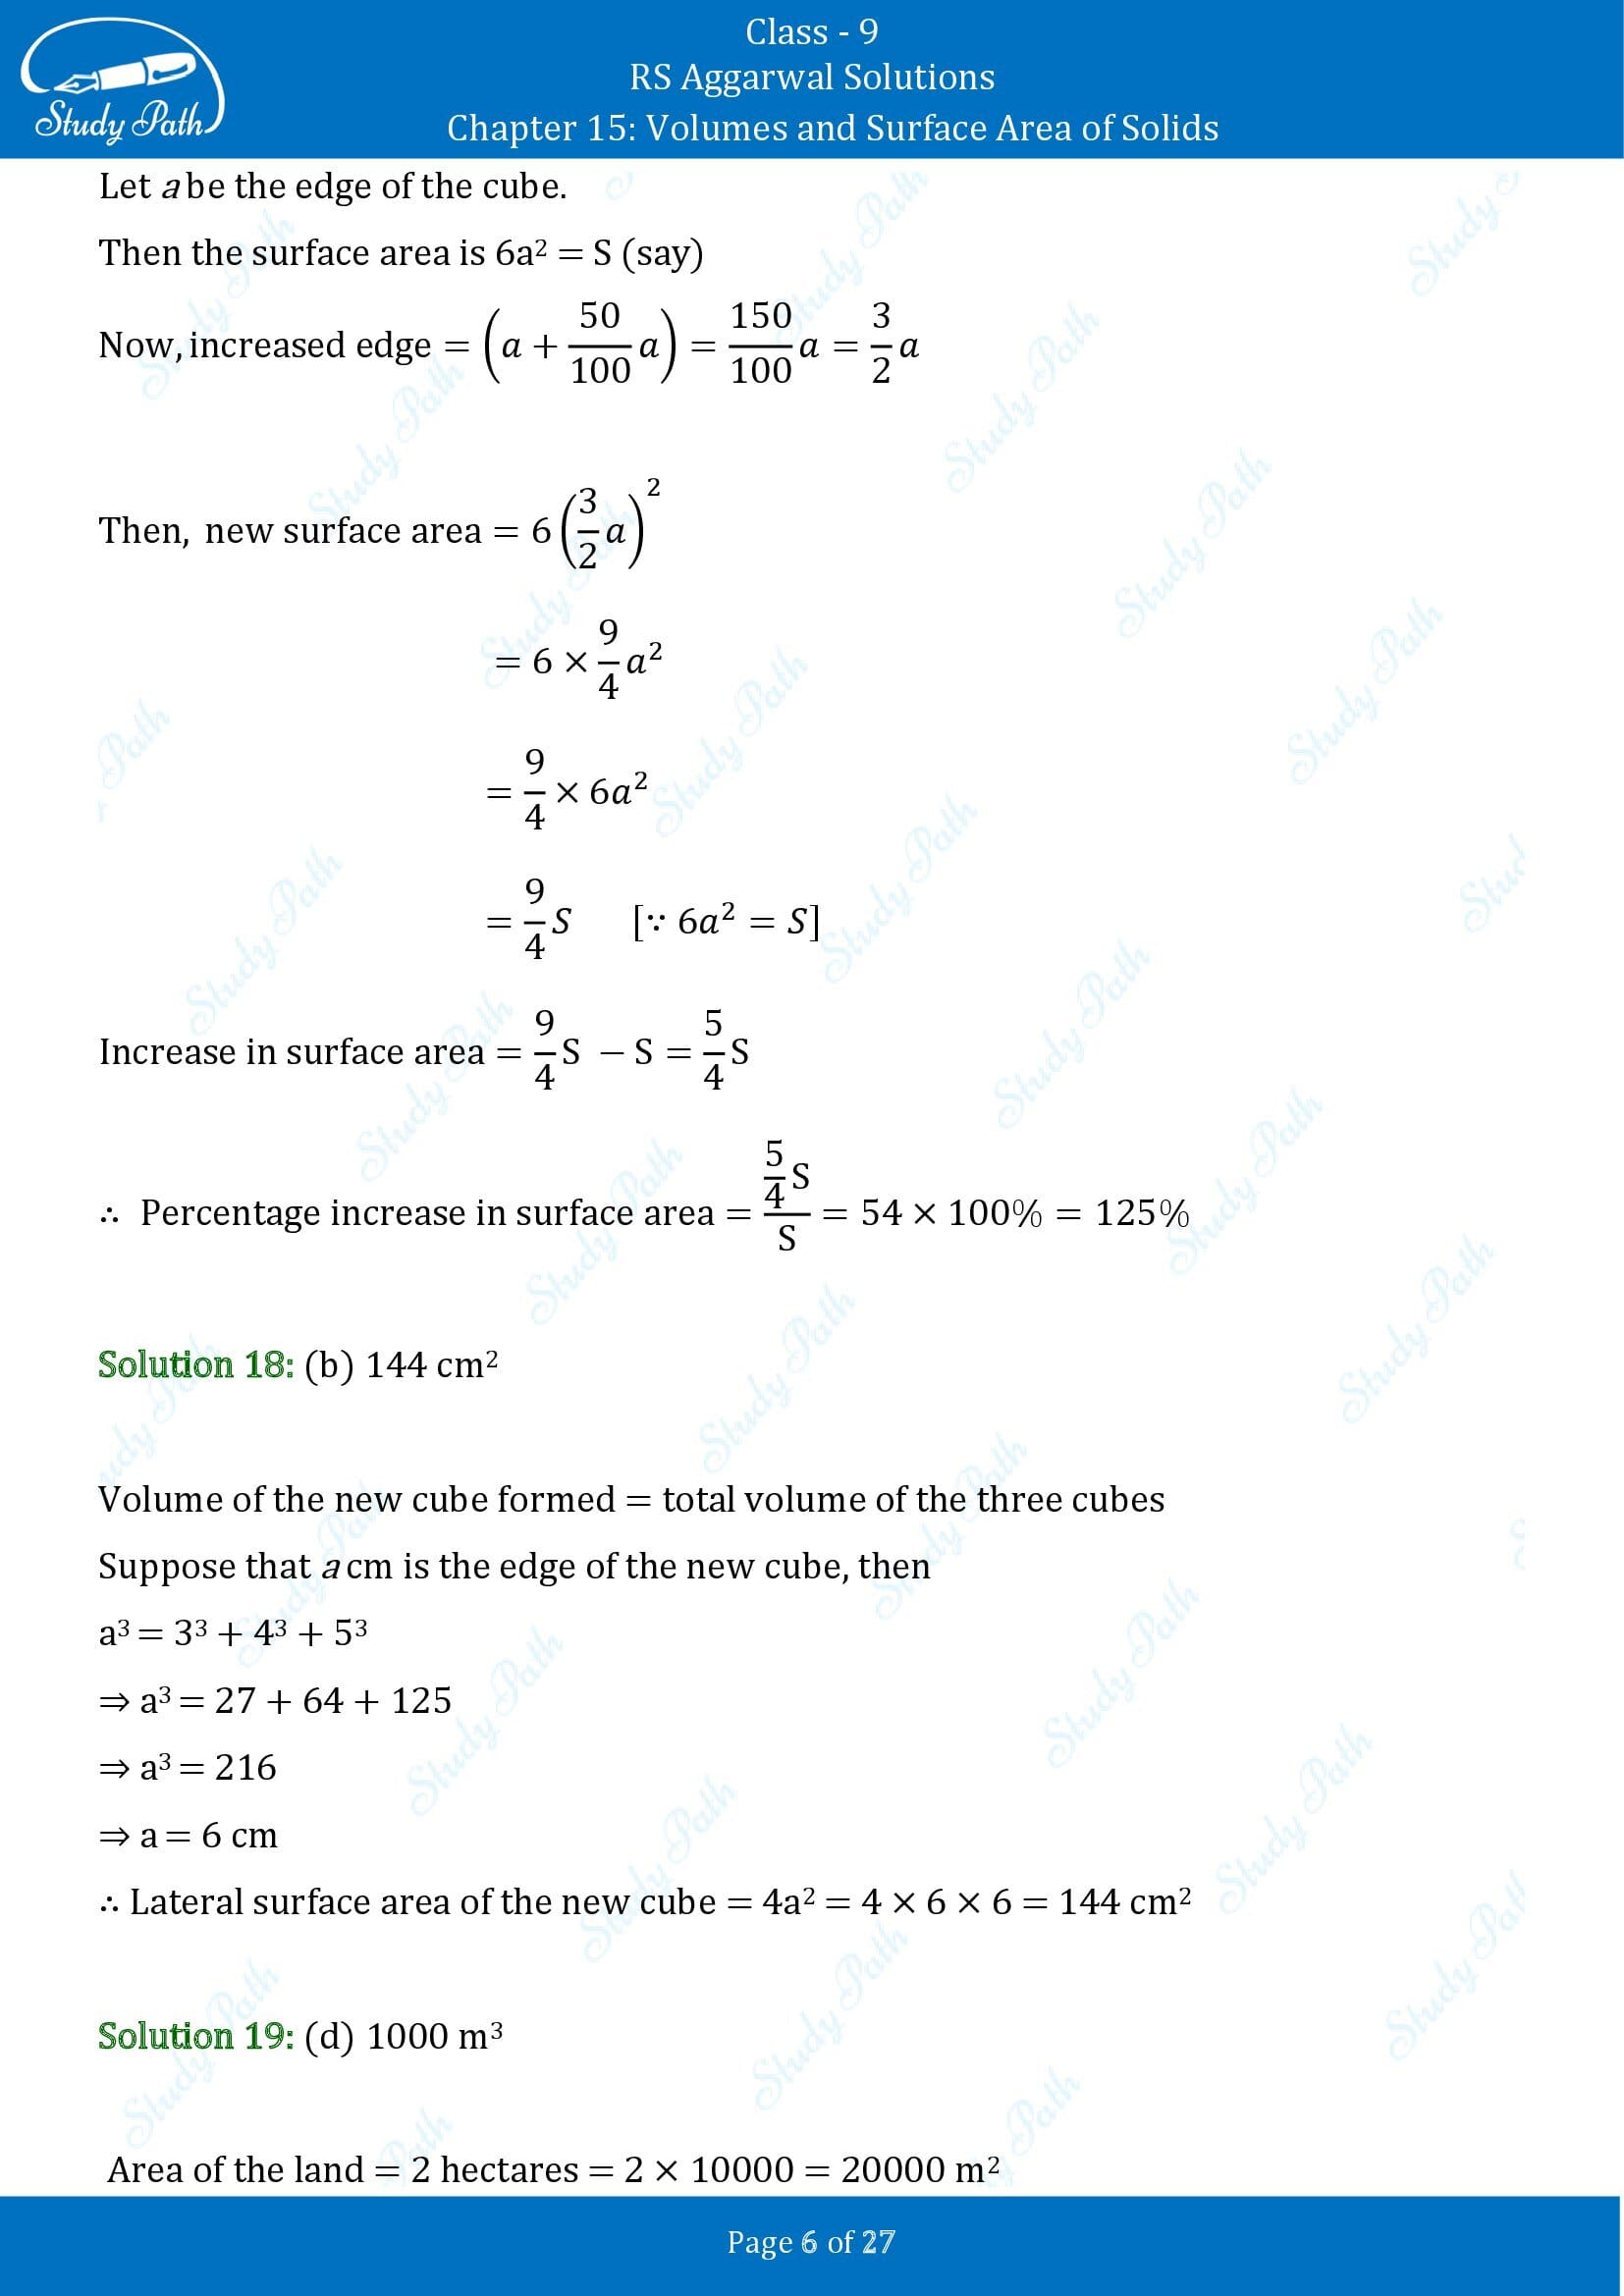 RS Aggarwal Solutions Class 9 Chapter 15 Volumes and Surface Area of Solids Multiple Choice Questions MCQs 00006